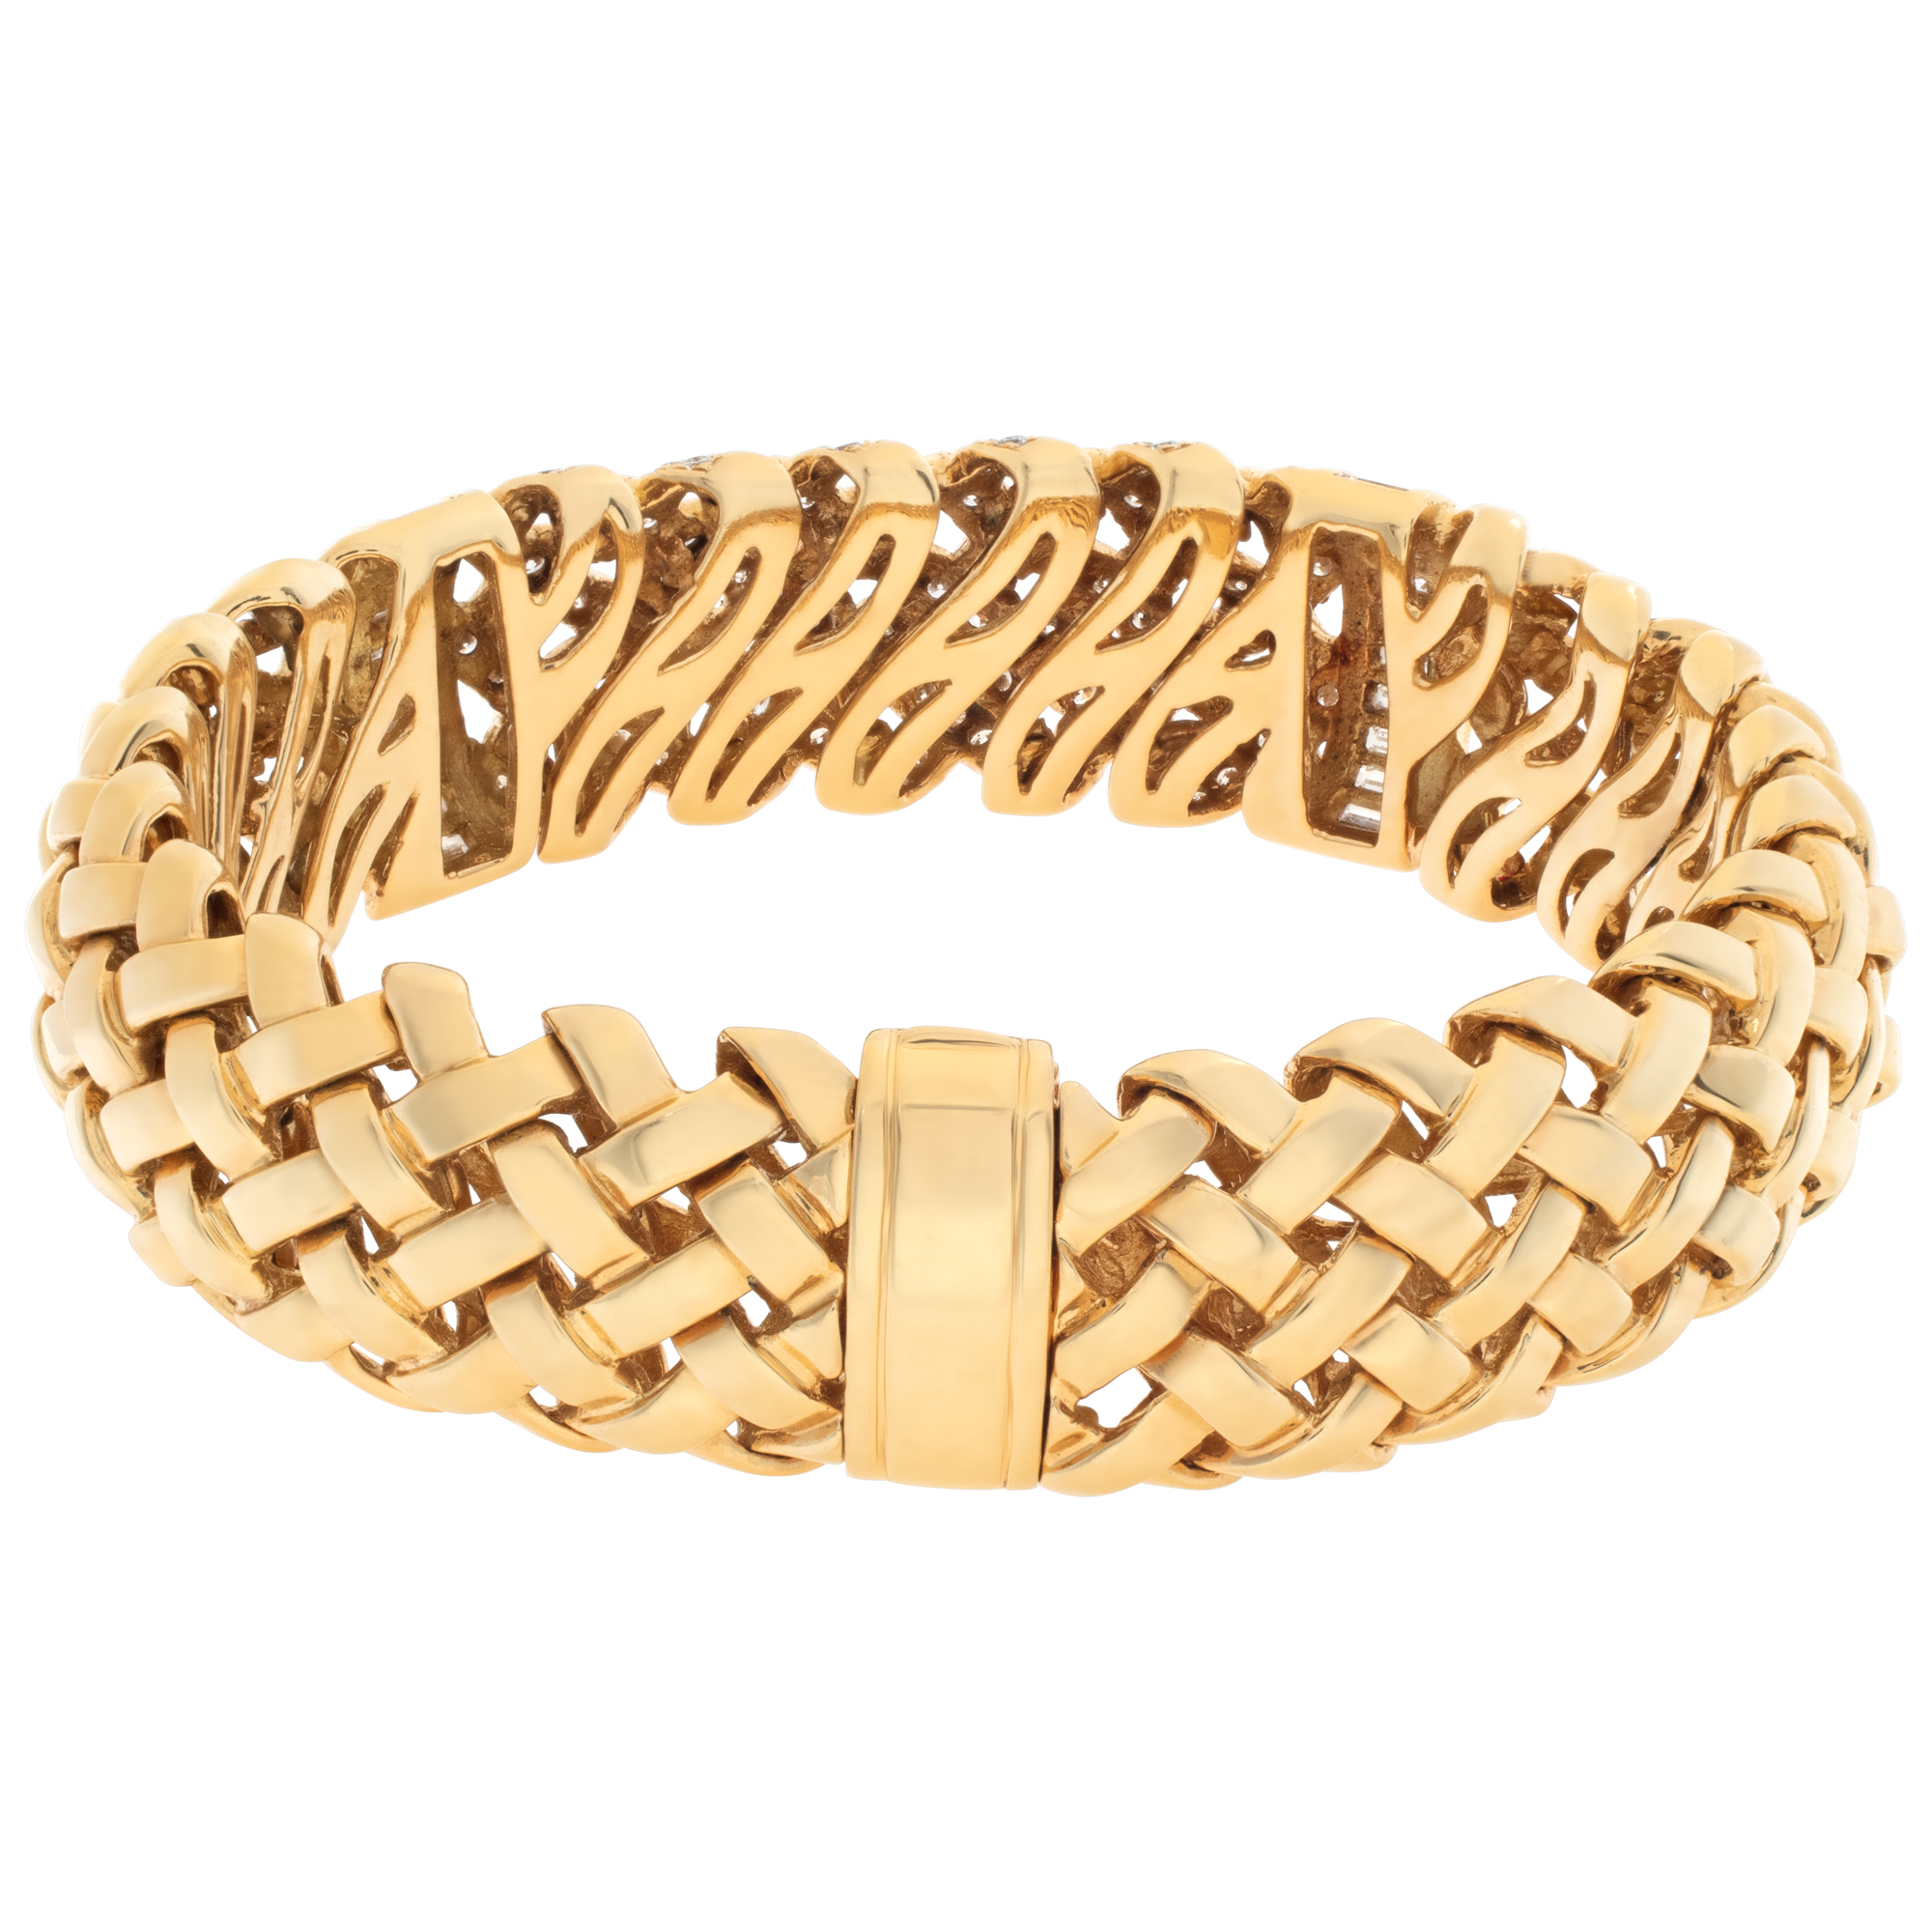 Tiffany & Co. VANNERIE Collection bracelet in 18K yellow gold image 4